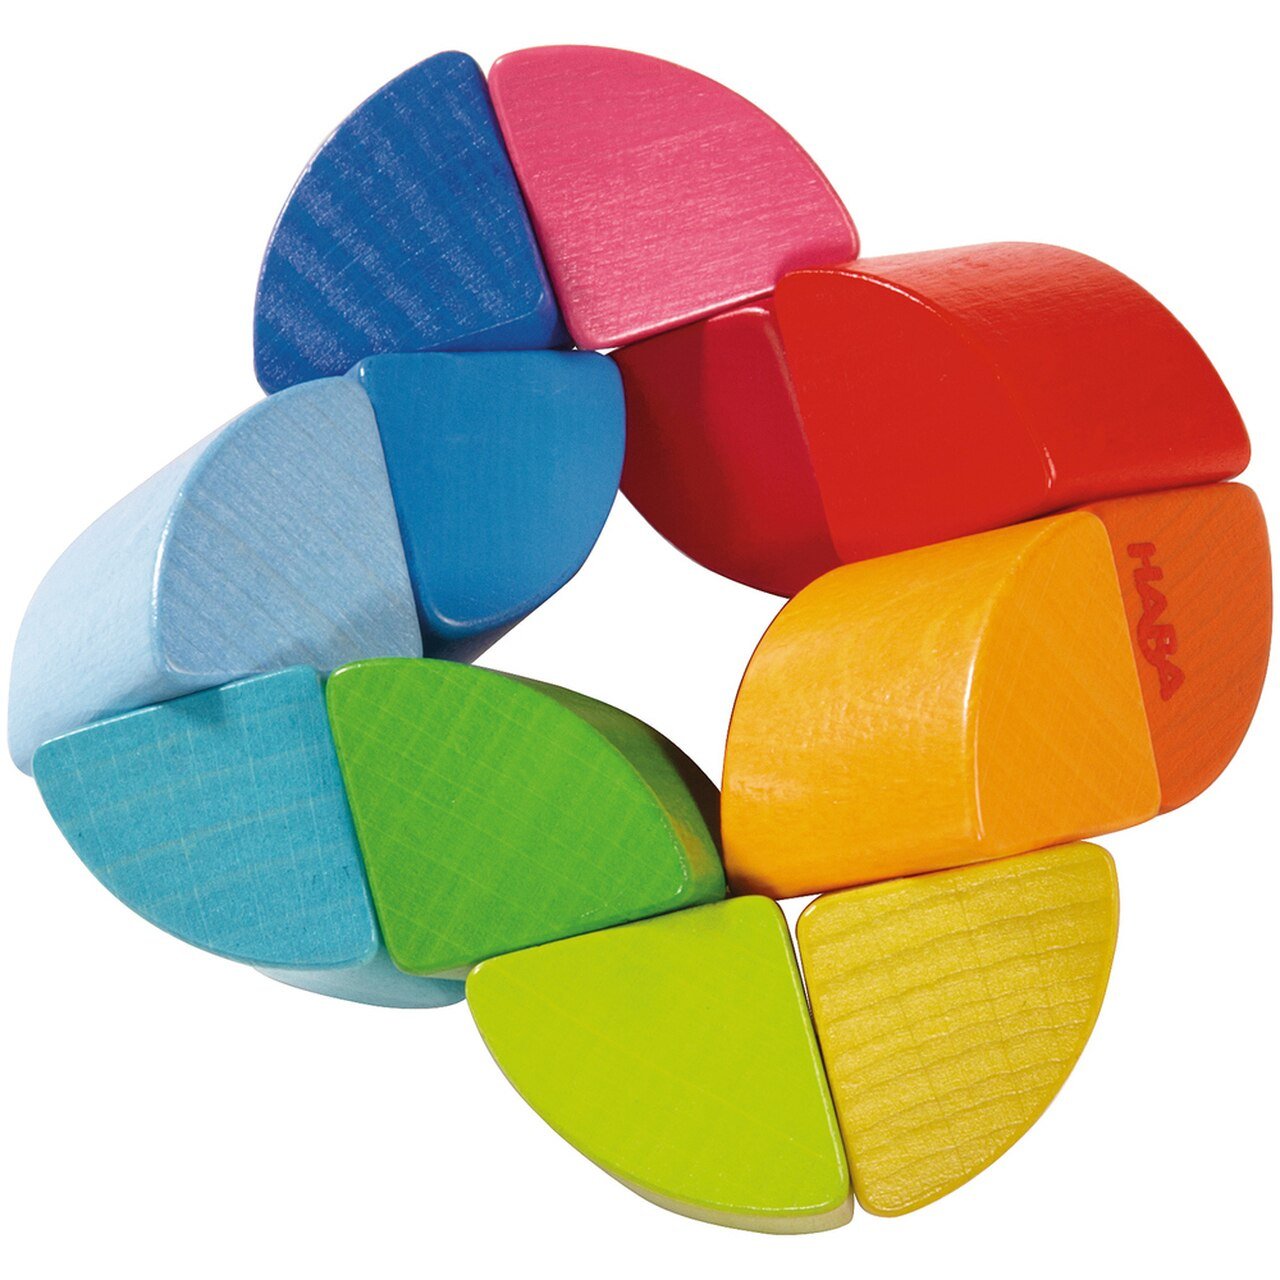 HABA Rainbow Ring Clutching Toy - Wood Wood Toys Canada's Favourite Montessori Toy Store